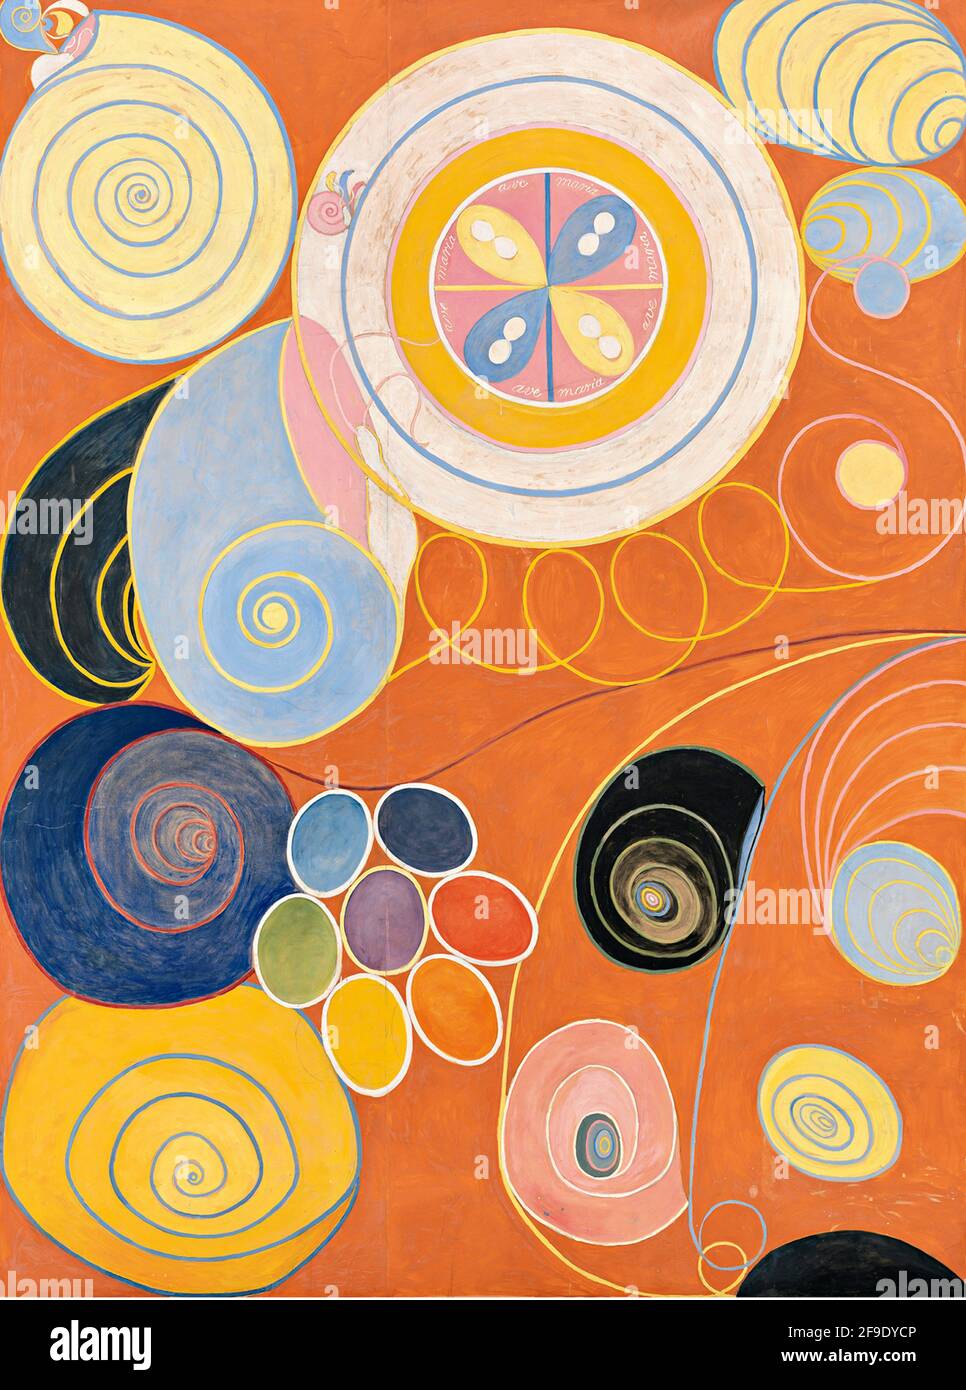 Hilma af Klint artwork - The Ten Largest - No 3 Youth. Stock Photo